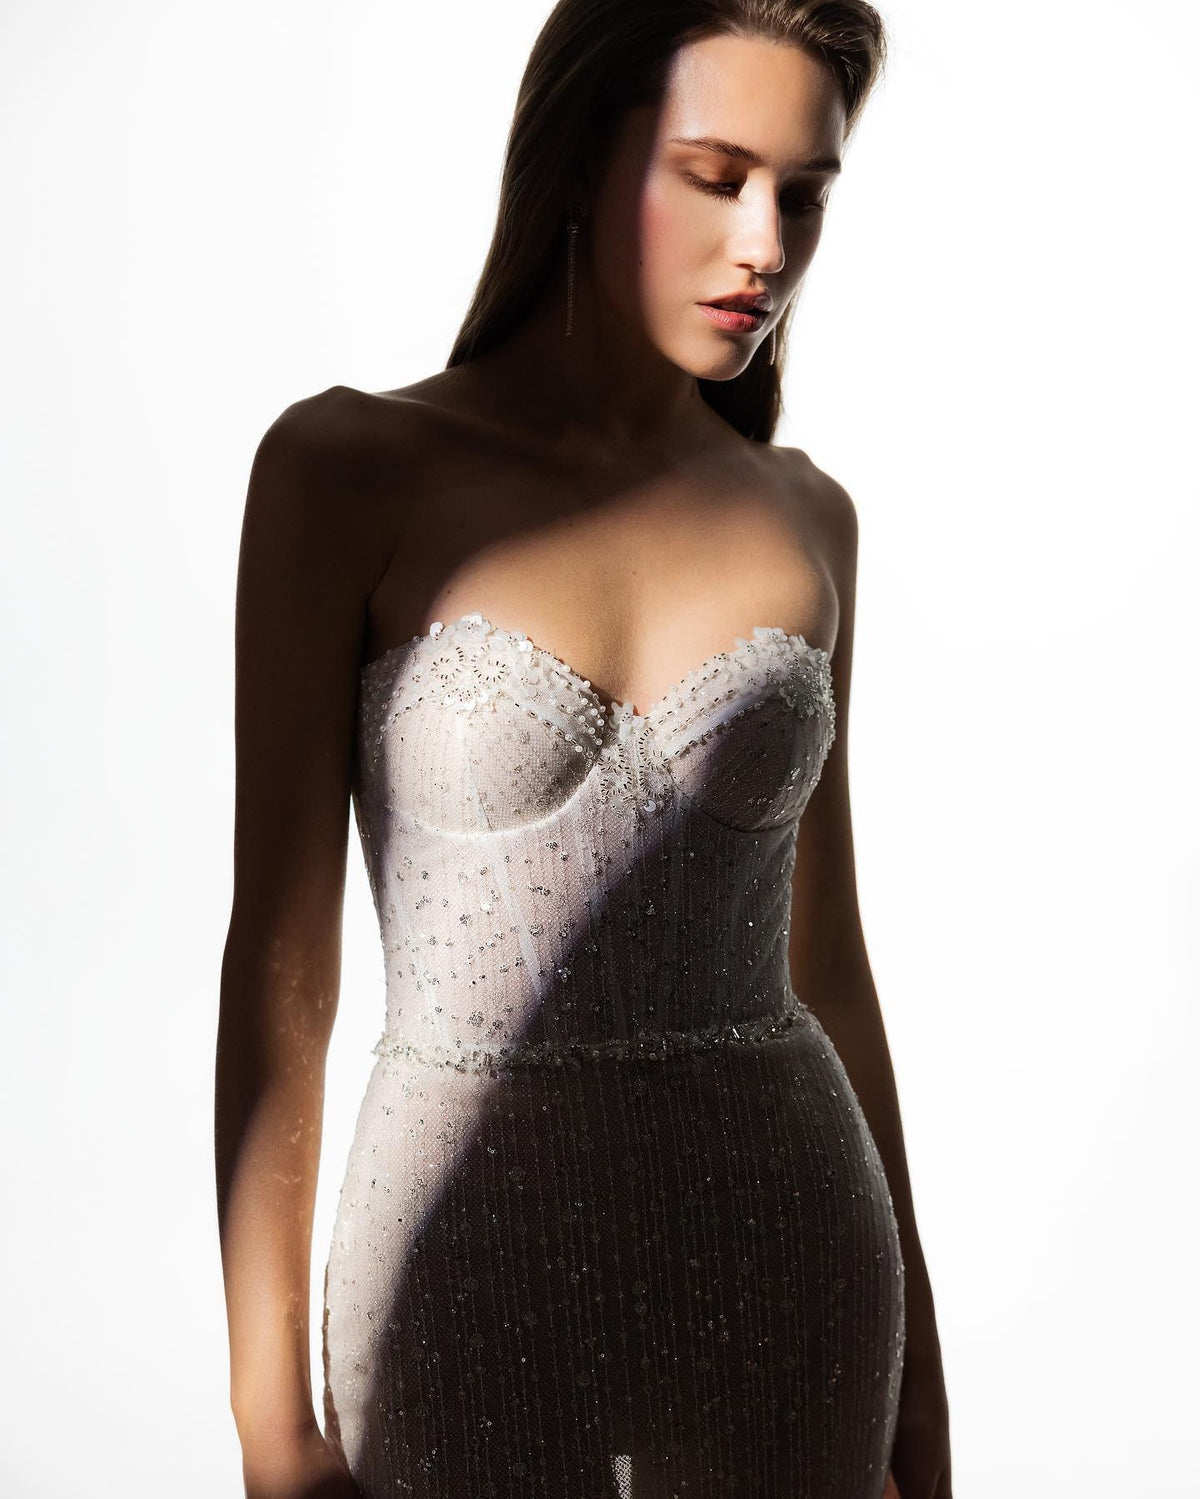 Modern Bustier Sweetheart Neckline Sleeveless Strapless Sparkle Sheath Dress with Removeable Straps Sexy Design Short Train Corset Back